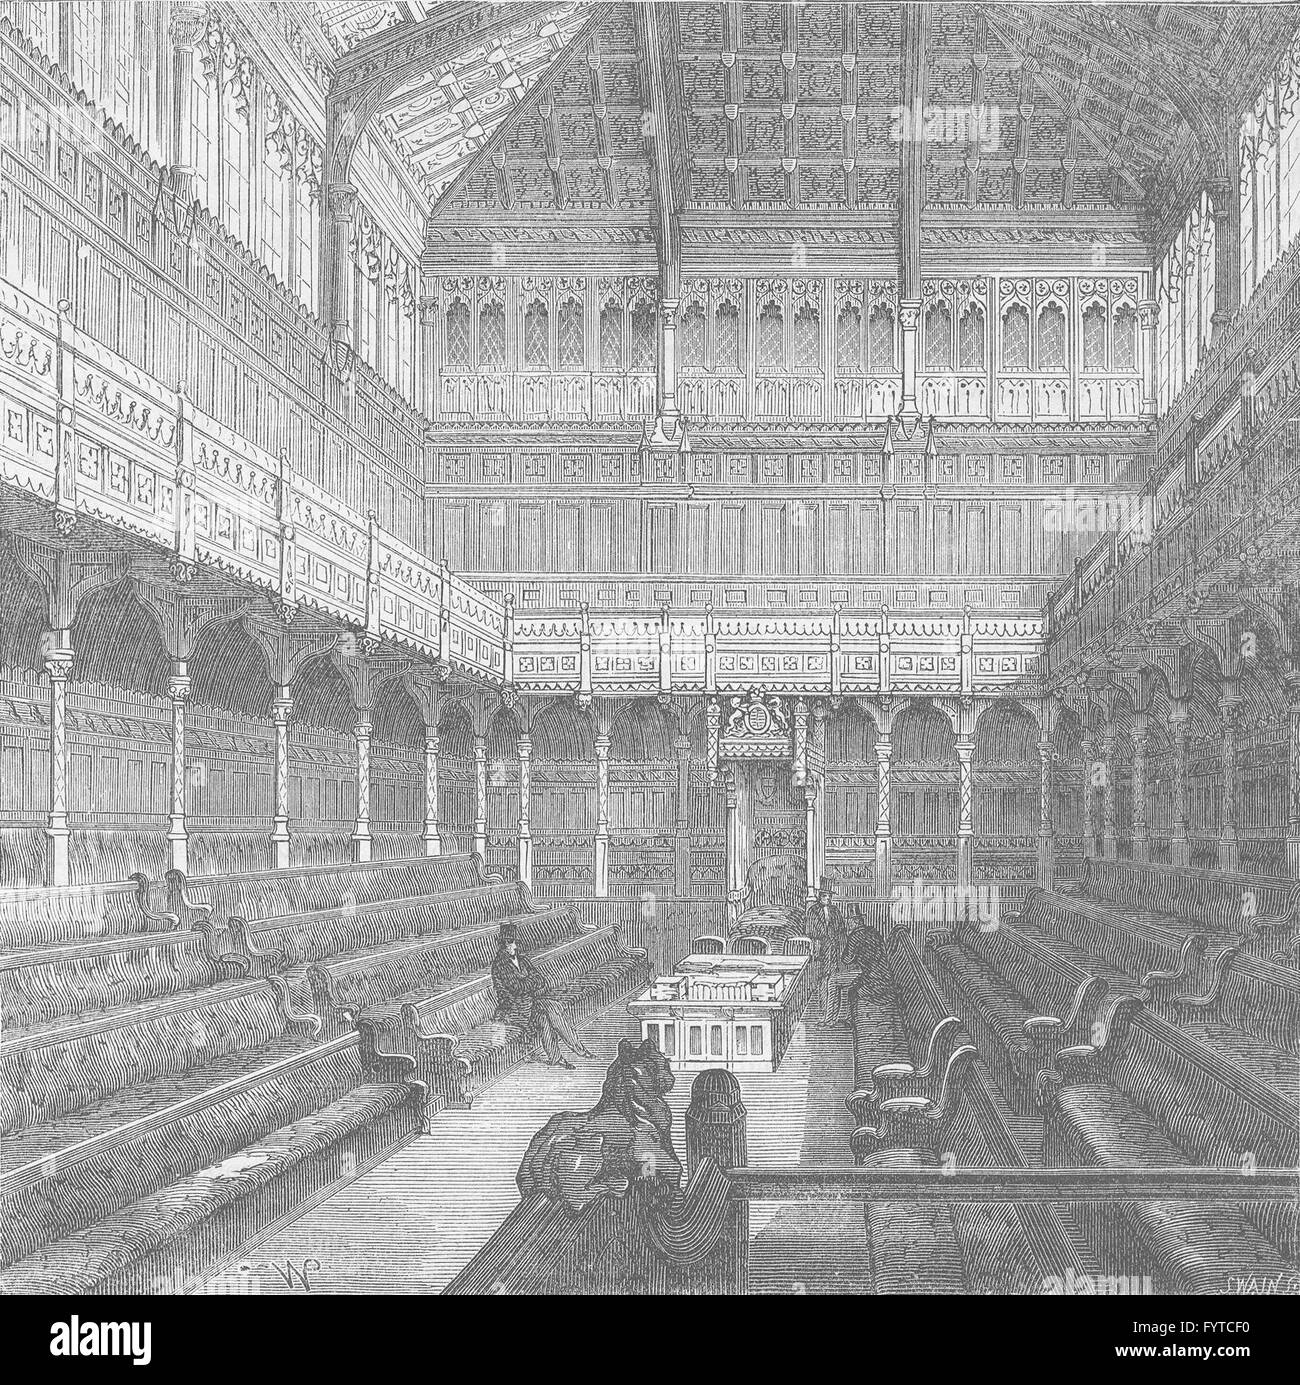 THE ROYAL PALACE OF WESTMINSTER: Interior of the House of Commons, 1875, c1880 Stock Photo